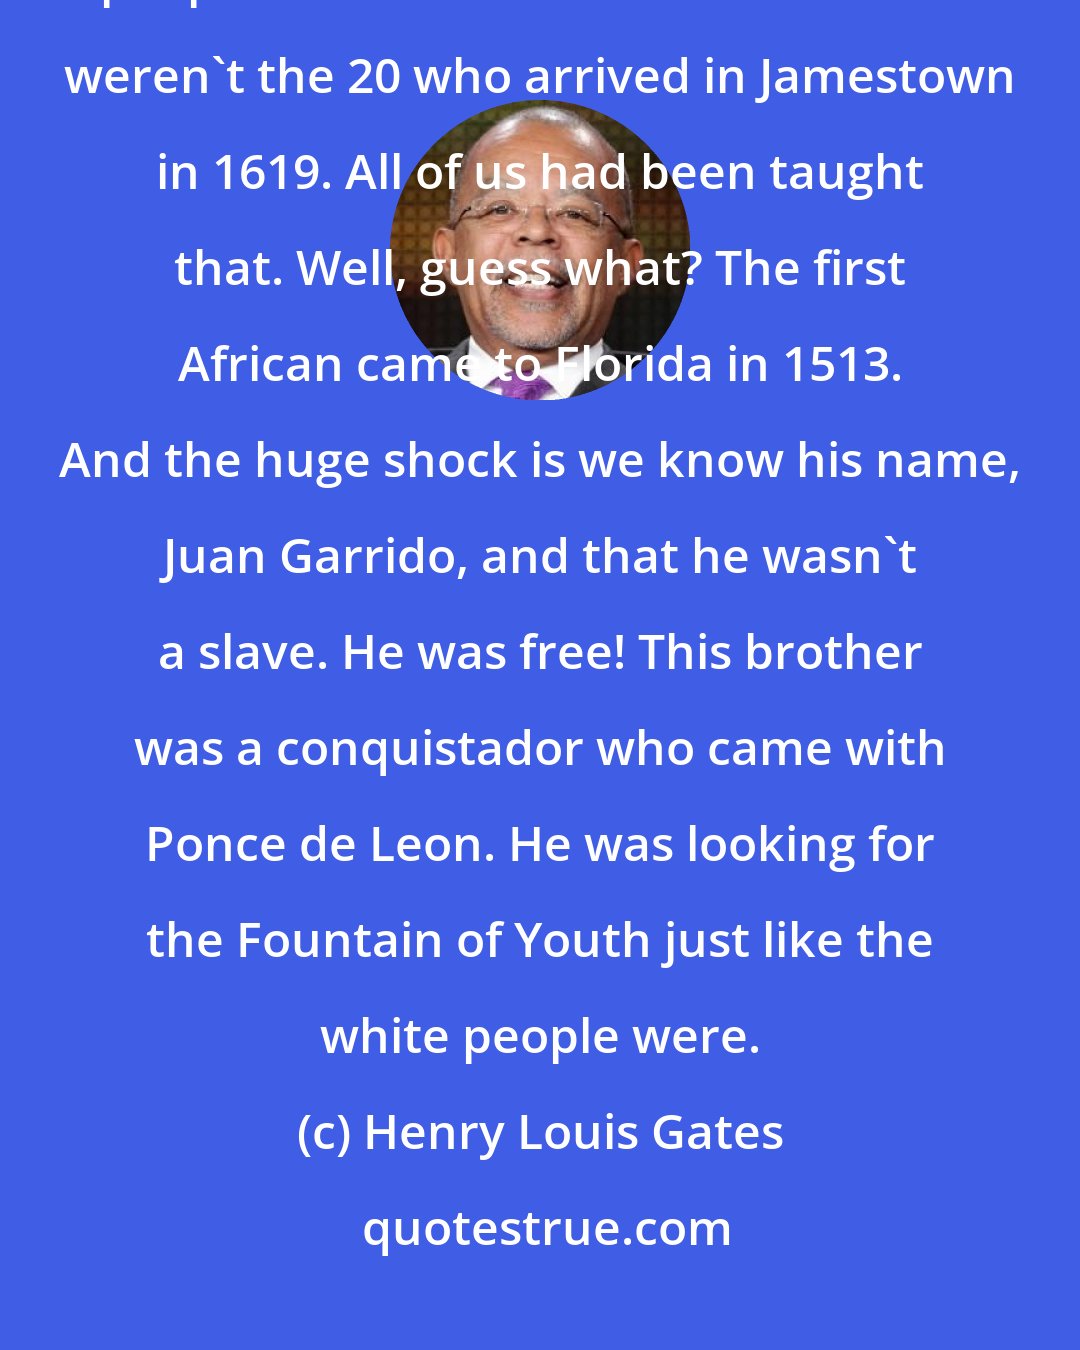 Henry Louis Gates: The biggest surprise for me, without a doubt, was that the first black people who came to the United States weren't the 20 who arrived in Jamestown in 1619. All of us had been taught that. Well, guess what? The first African came to Florida in 1513. And the huge shock is we know his name, Juan Garrido, and that he wasn't a slave. He was free! This brother was a conquistador who came with Ponce de Leon. He was looking for the Fountain of Youth just like the white people were.